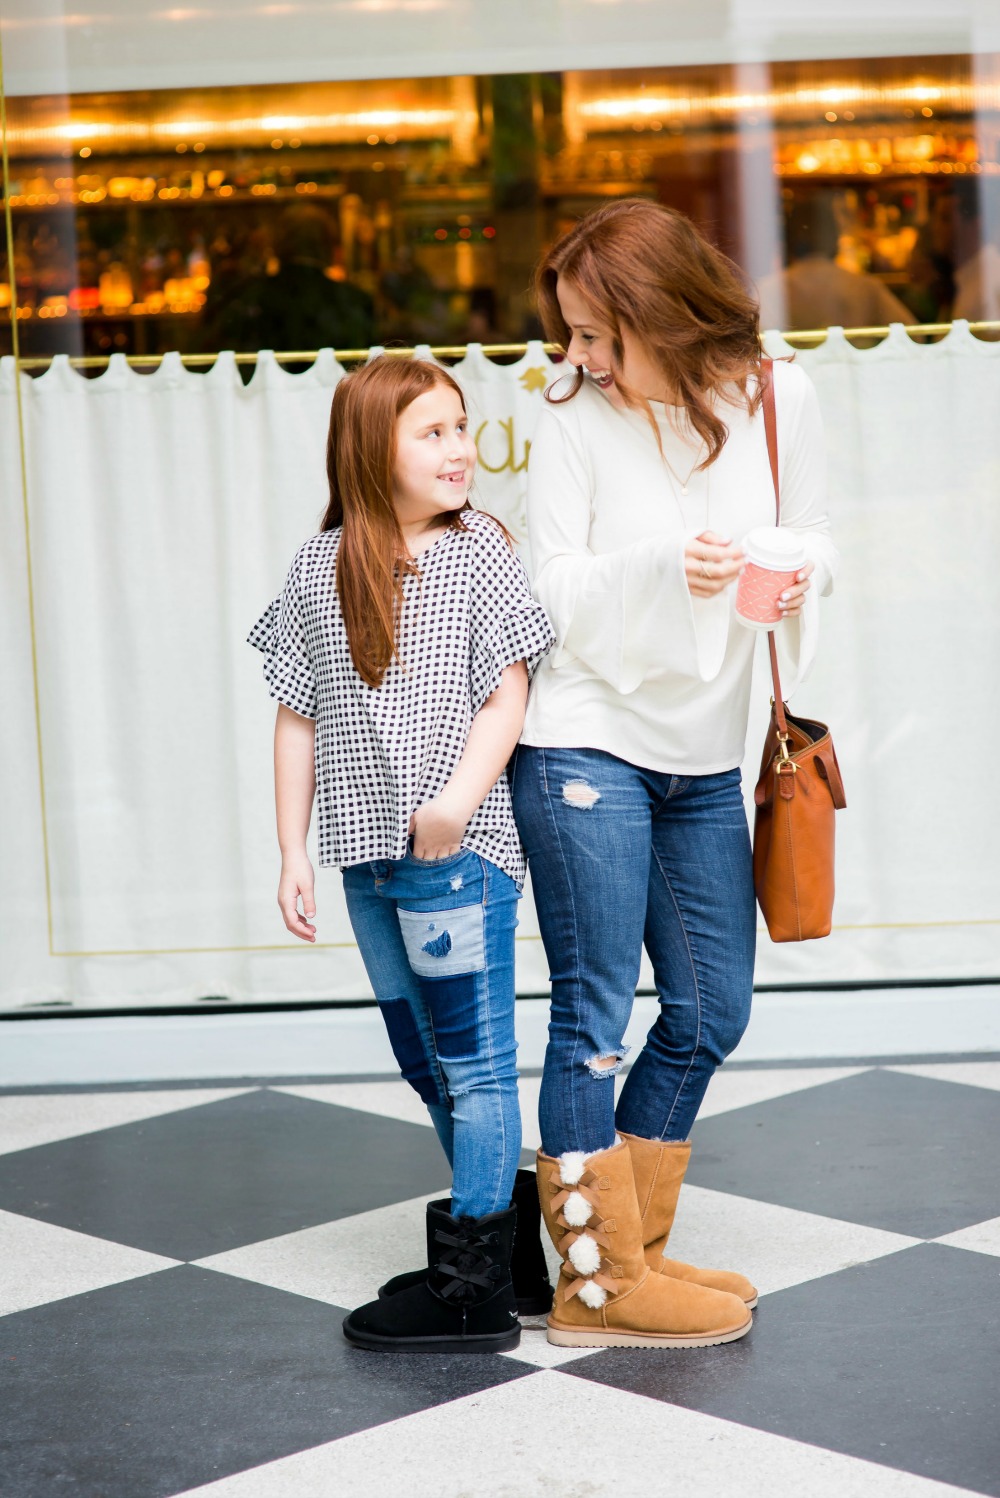 Cozy cute mother daughter winter style (on a budget!) - winter boots edition by popular Florida style blogger The Modern Savvy